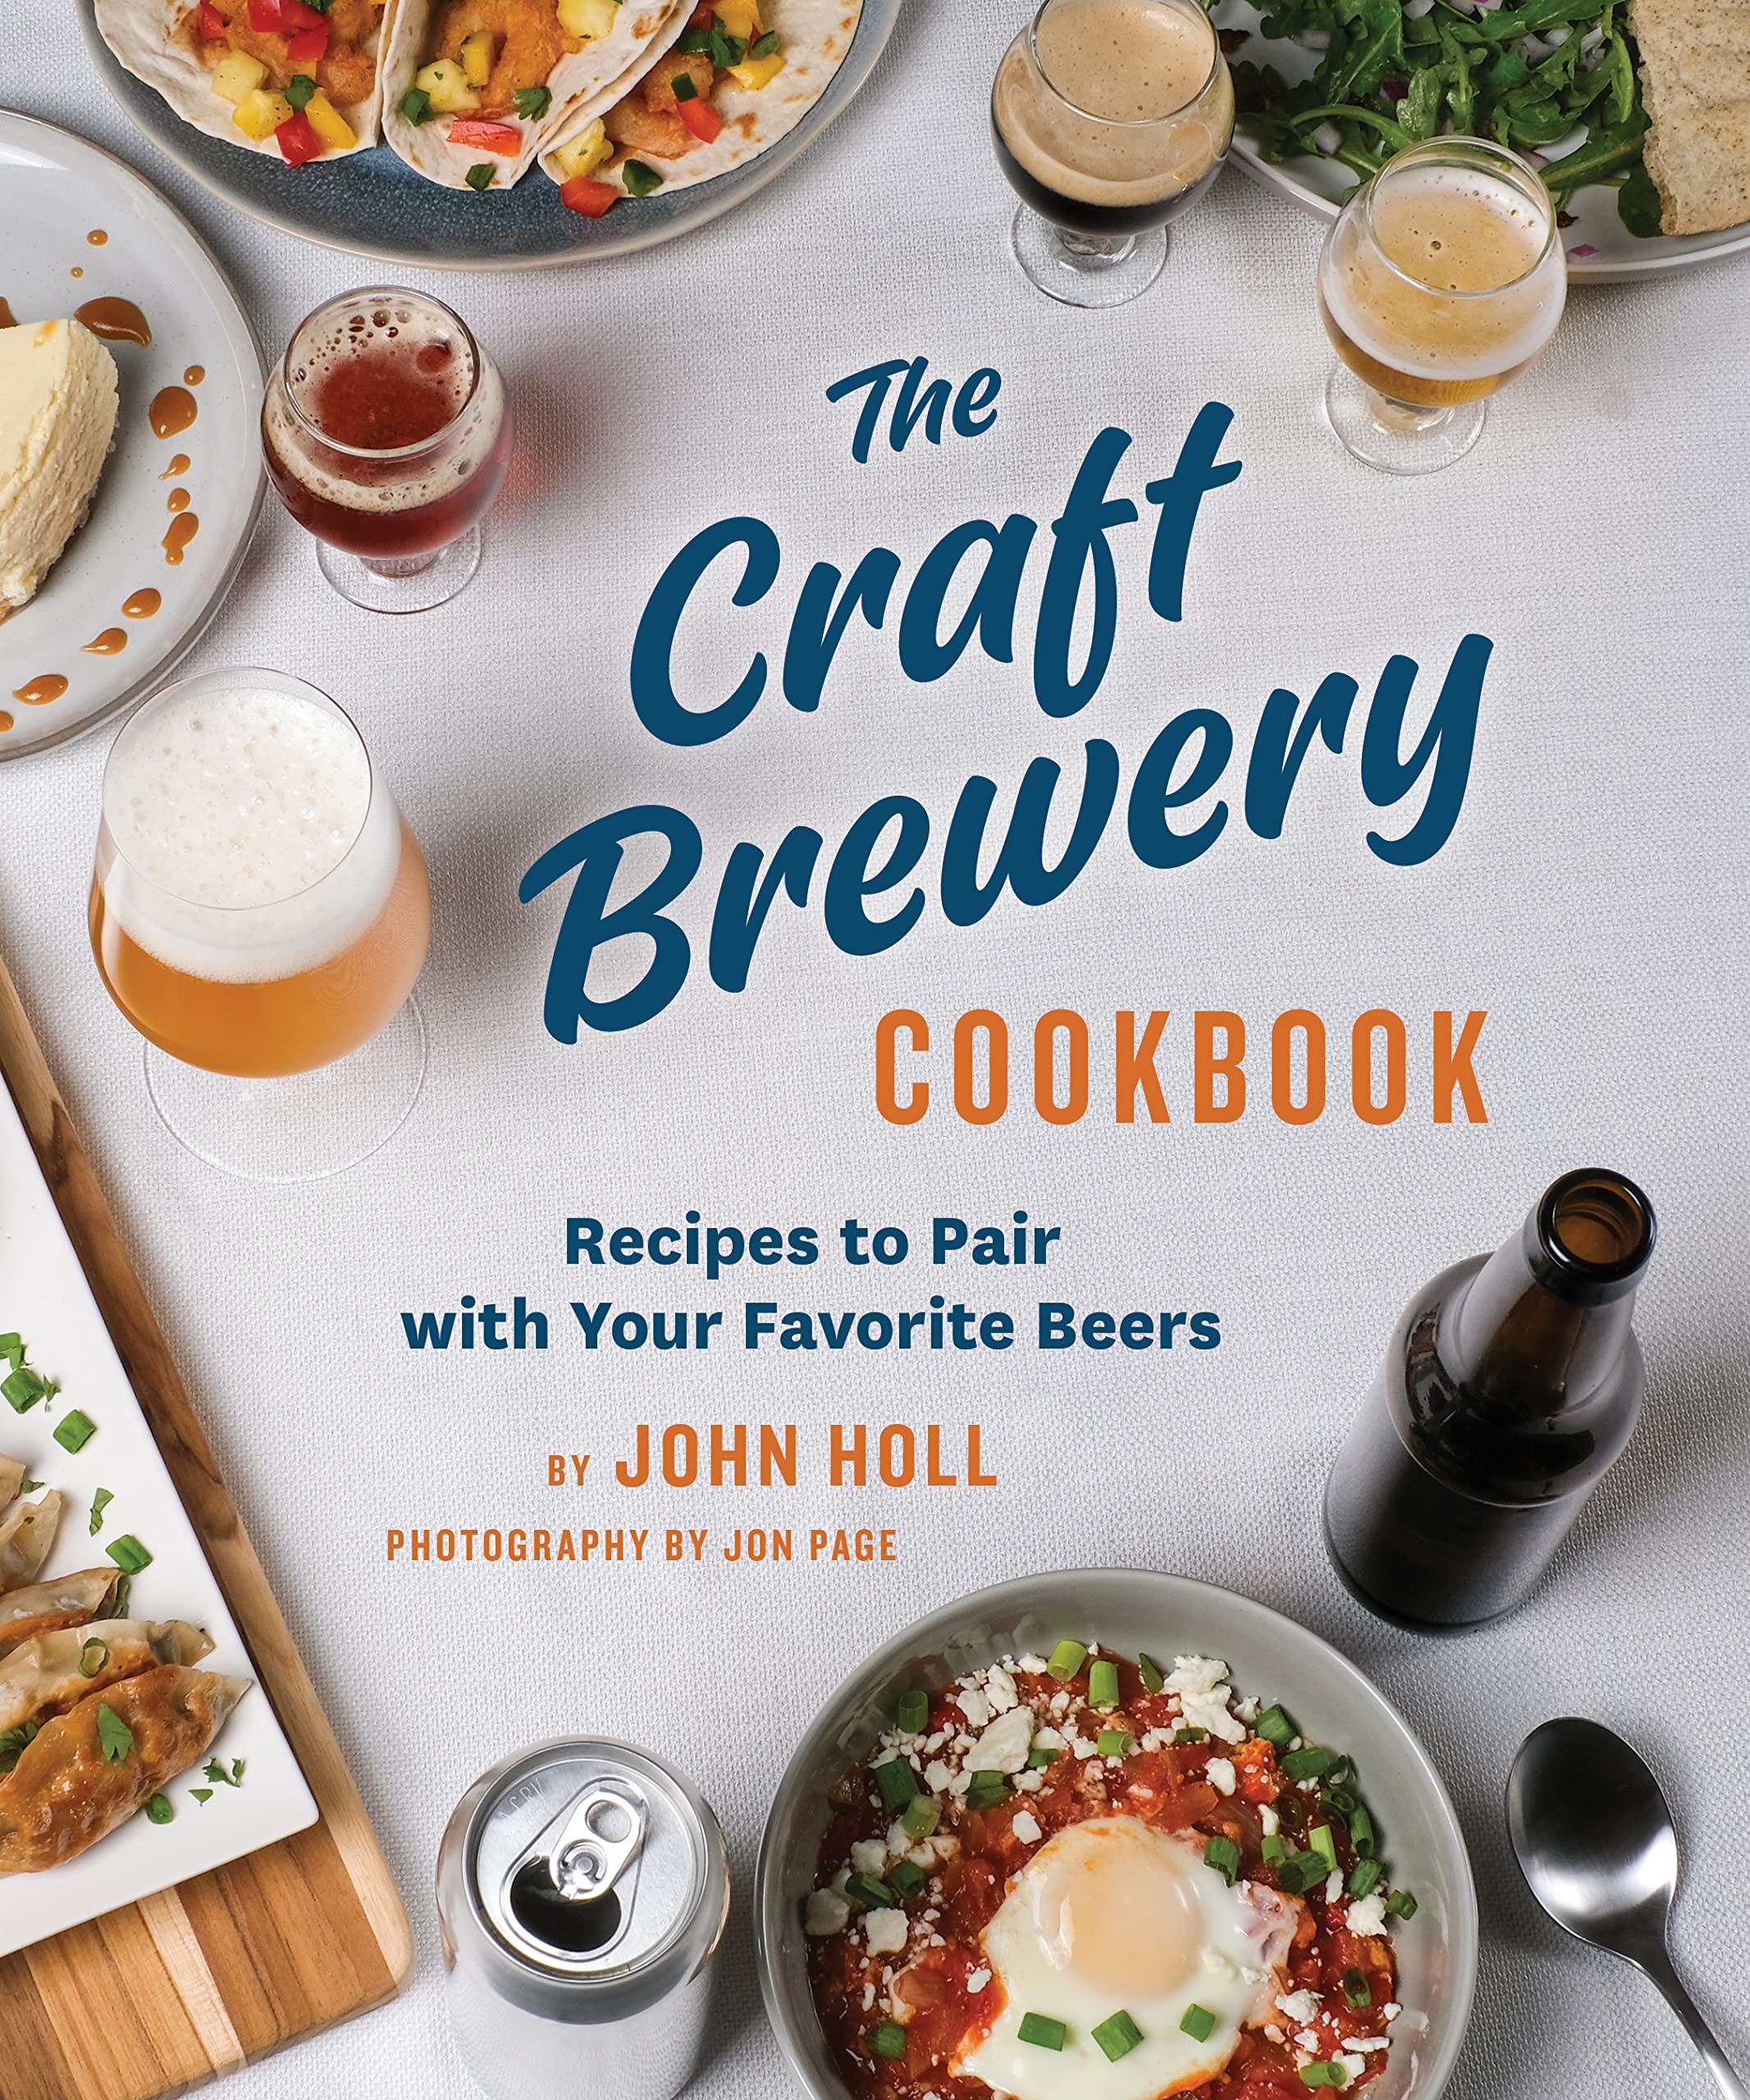 The Craft Brewery Cookbook - Recipes To Pair With Your Favorite Beers by John Holll and photos by Jon Page